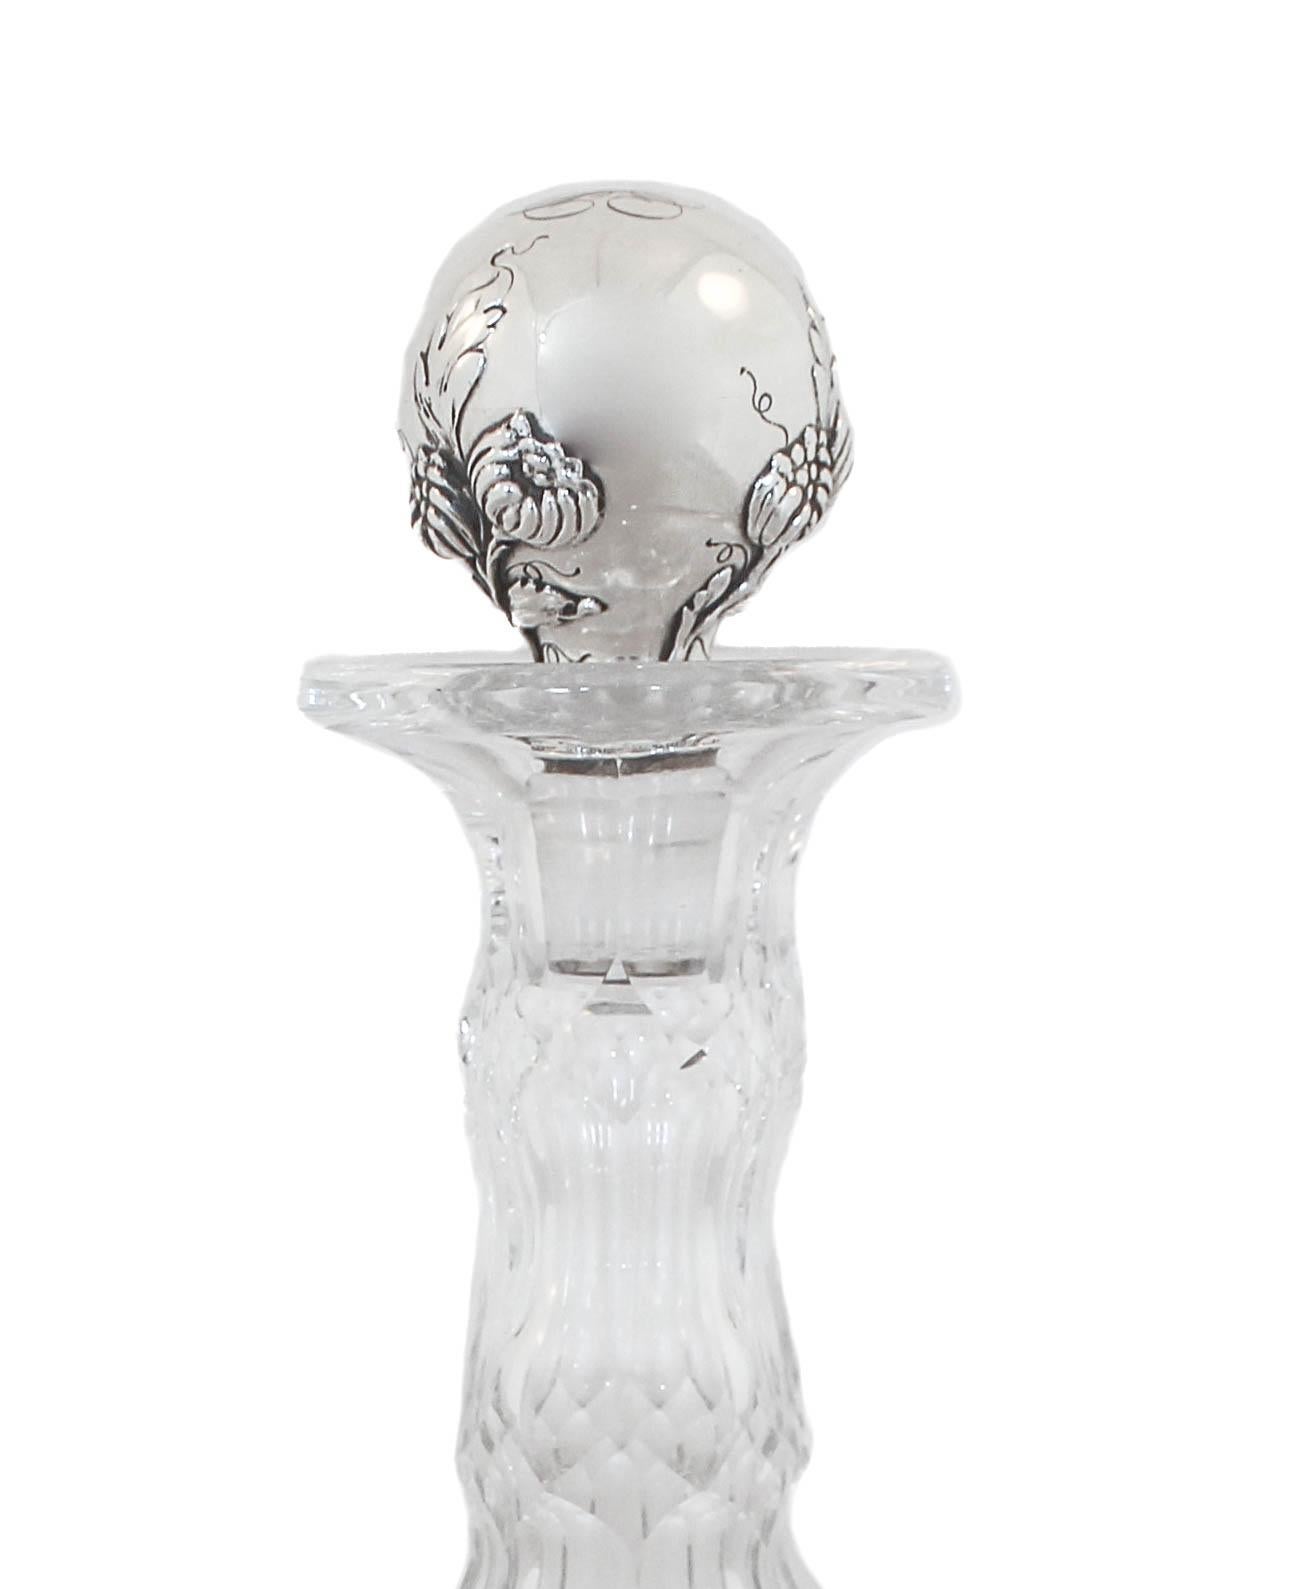 We are happy to offer you this crystal decanter with a sterling silver stopper. The crystal was made by the Hawkes Glass Company and the stopper by Theodore Starr Silver. Two amazing makers collaborated on this piece. Imagine how beautiful it will